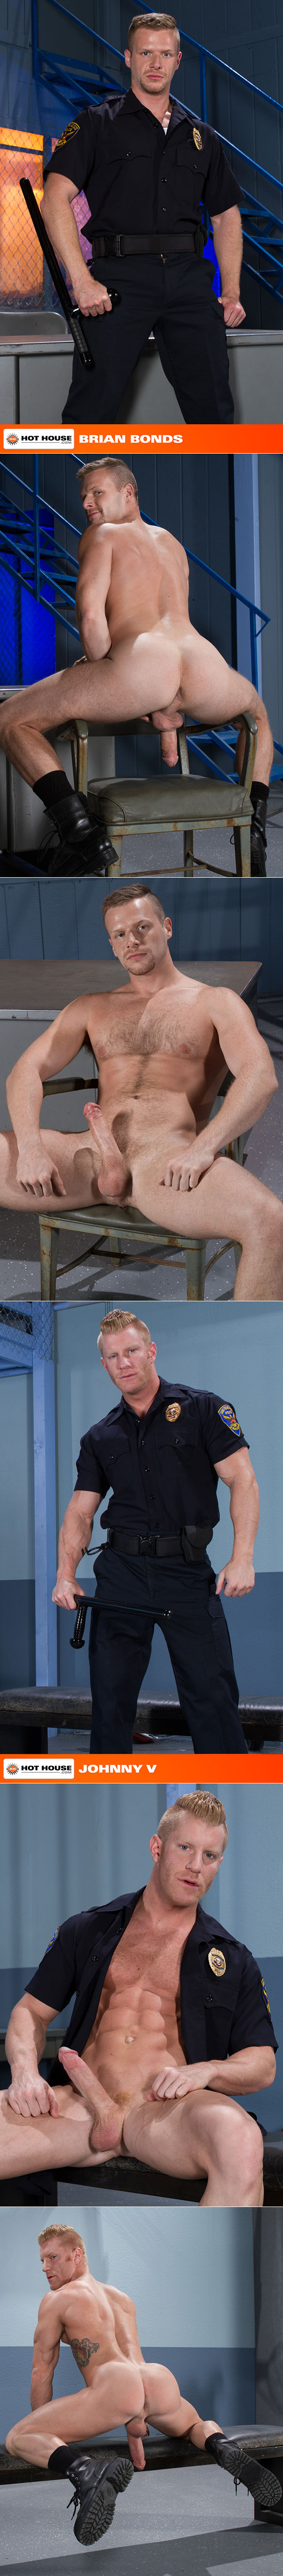 HotHouse: Johnny V and Brian Bonds bang each other in "Stiff Sentence"